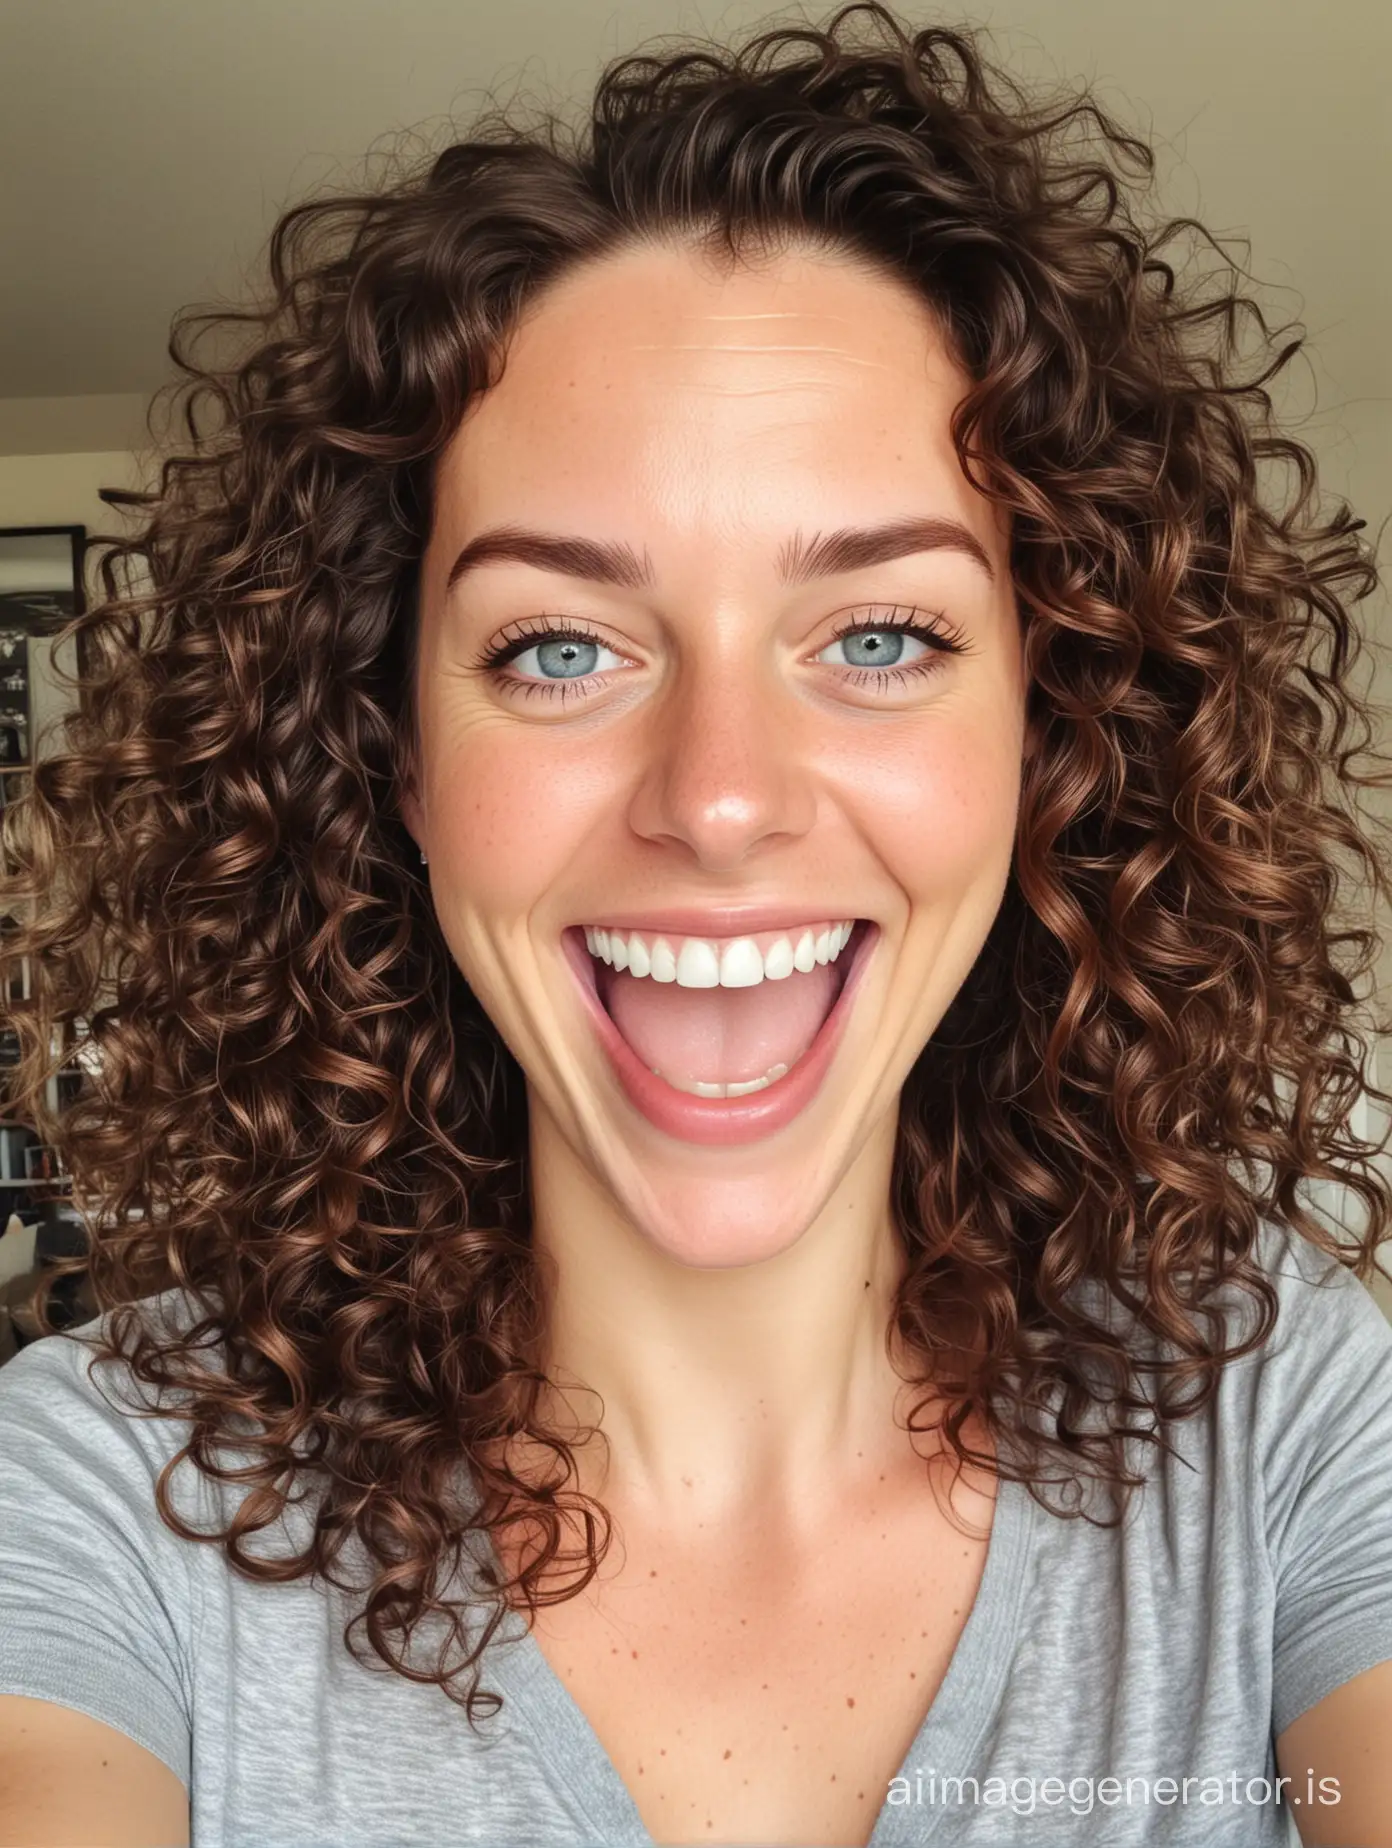 a selfie of a laughing 30-year-old brunette woman with curly hair and blue eyes inside a home office